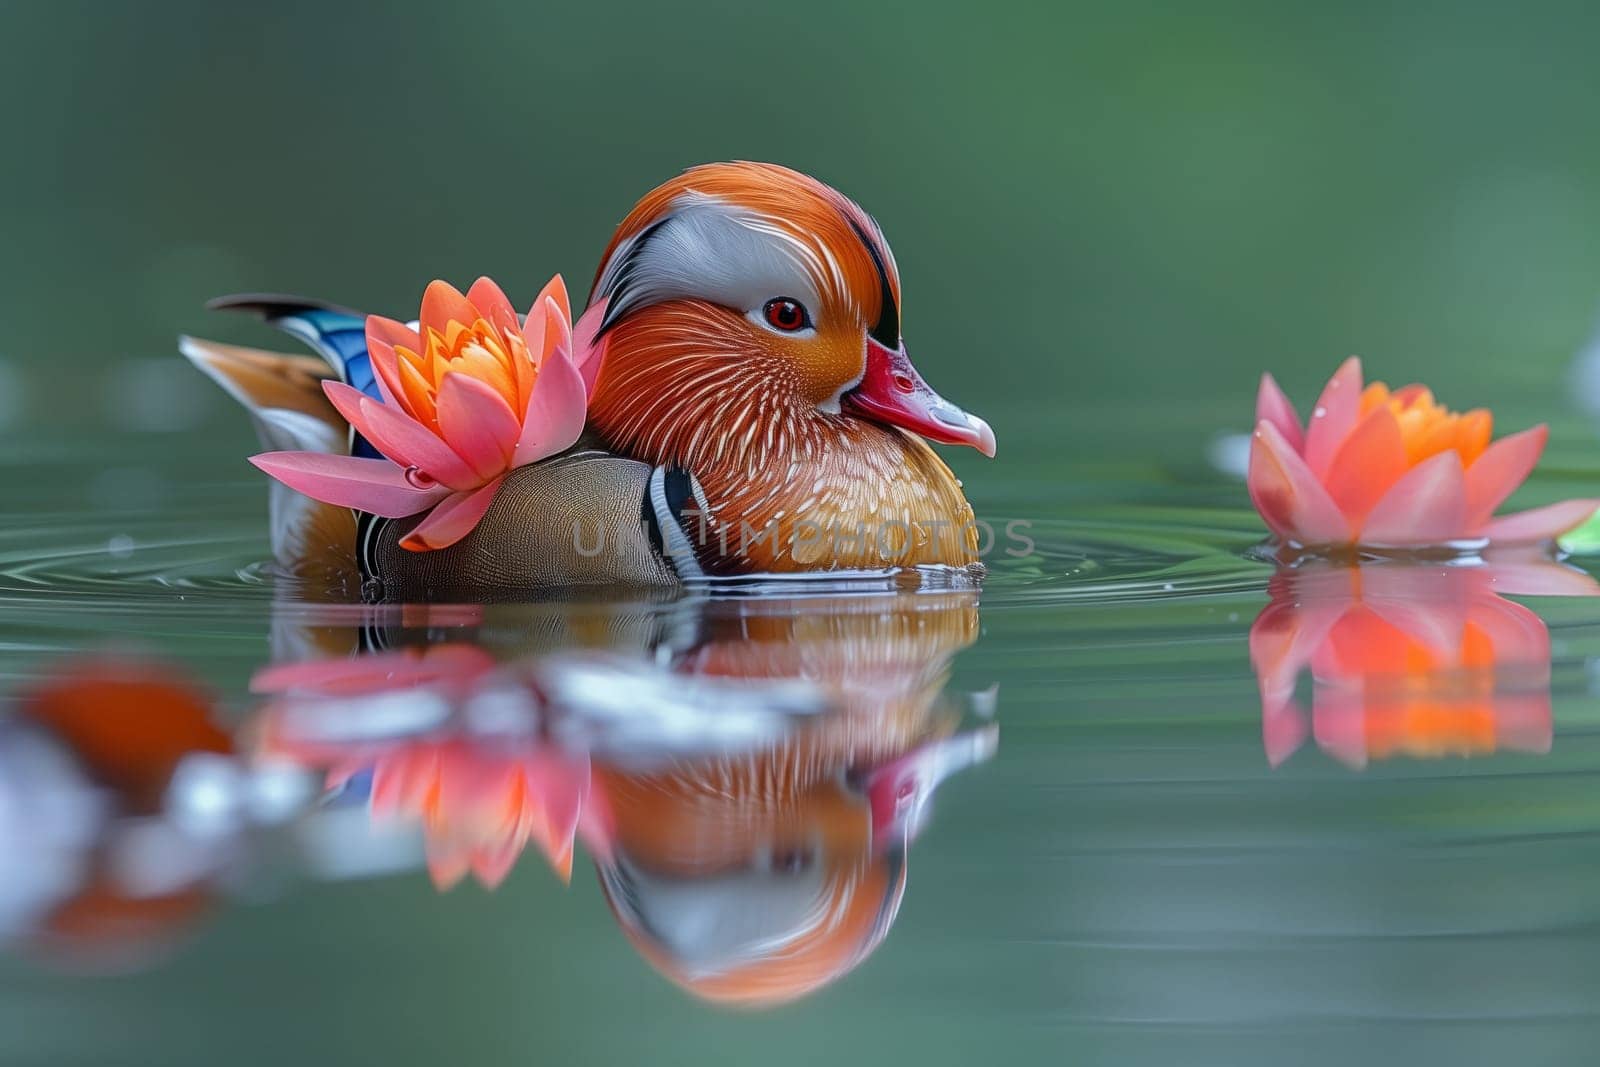 A Mandarin duck gracefully swims in a pond adorned with water lilies, creating a picturesque natural landscape with other ducks, geese, and swans